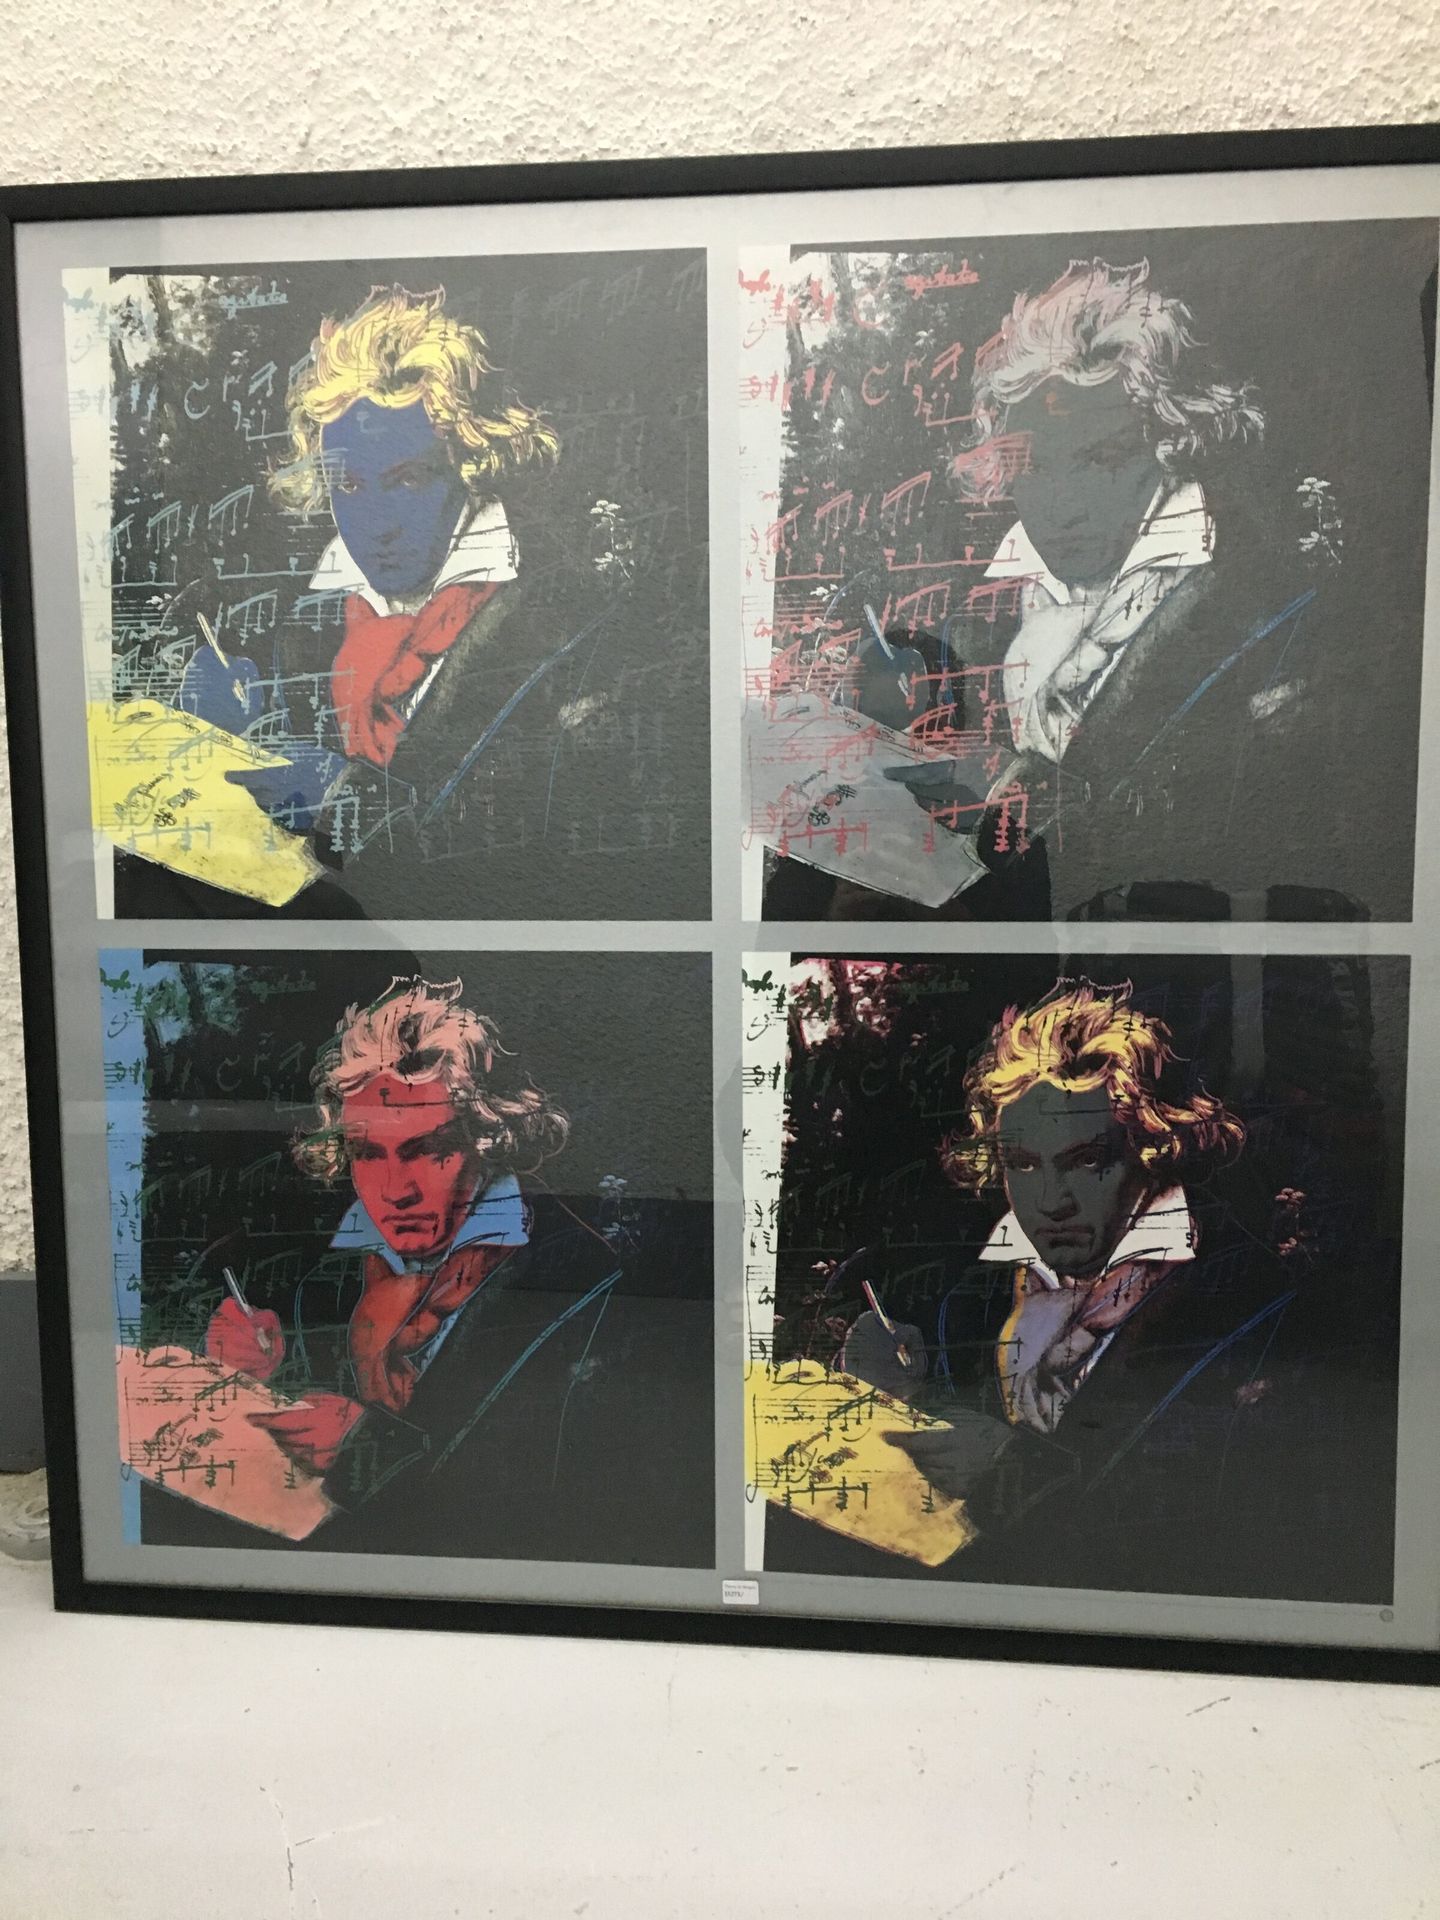 Null Framed reproduction: Beethoven

97x97 cm